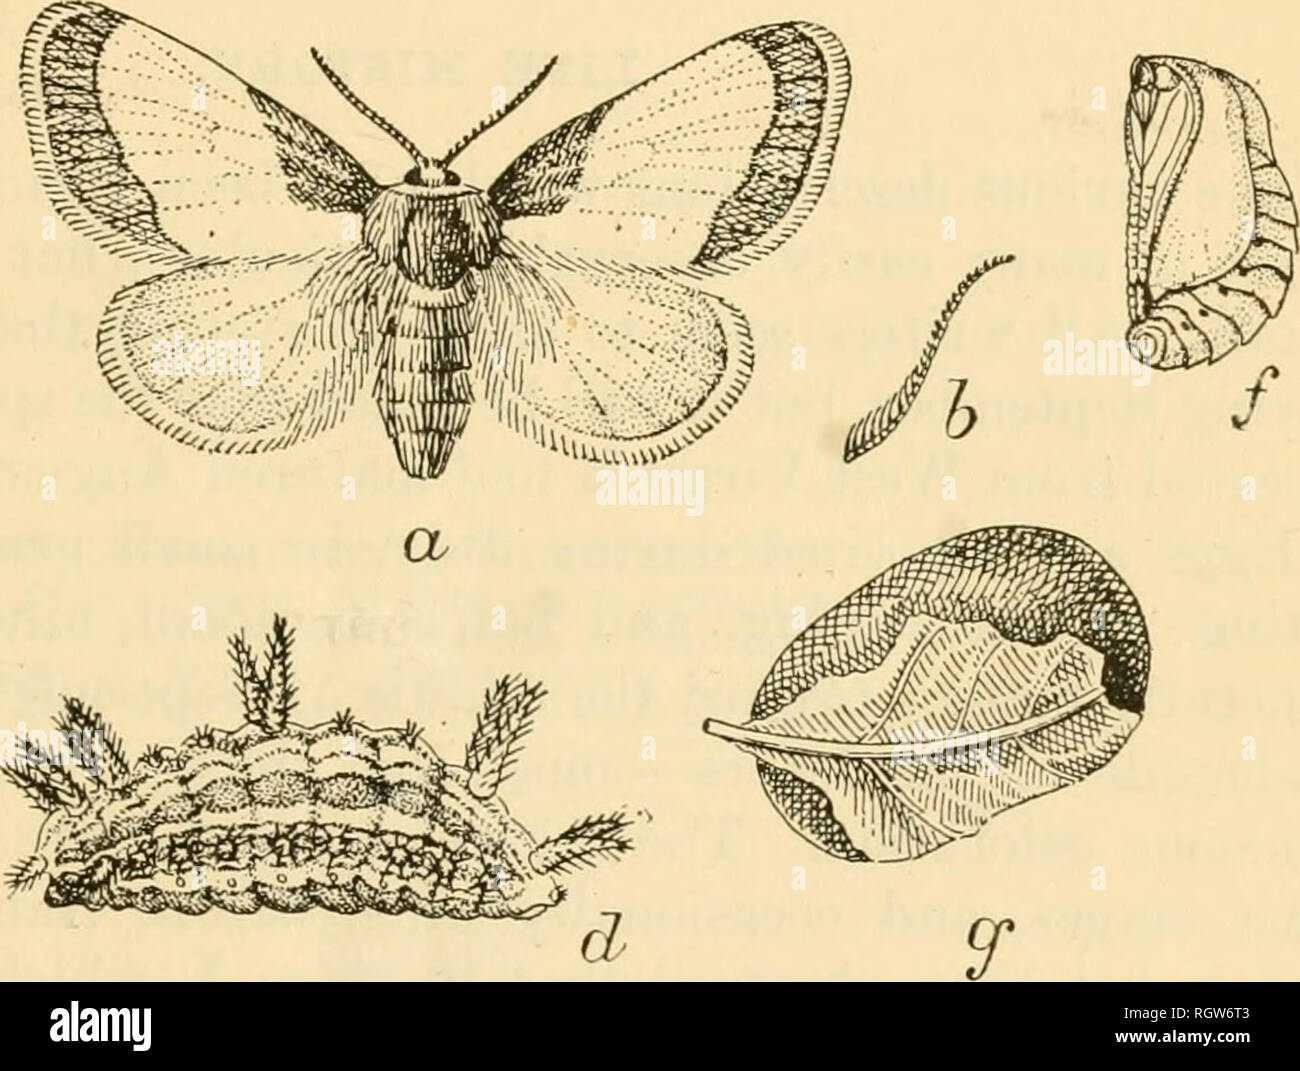 . Bulletin. Insects; Insect pests; Entomology; Insects; Insect pests; Entomology. ^^^$?i. Fig. 1.—The rose slug-caterpillar (Euclea indctermina) : a, Female moth; b, male an- tenna ; c, larva, dorsal view ; d, larva, lateral view ; e, spine of larva, much enlarged ; f, pupa; g, cocoon. All enlarged; e, greatly enlarged. (Original.) cut by the larva before transformation to pupa, while it is quite obvious that the cephalic armament of the pupa is designed for that purpose, the pupa constantly wriggling around and around, thus making the perfectly circular flap. October 7, 1883, larva? were foun Stock Photo